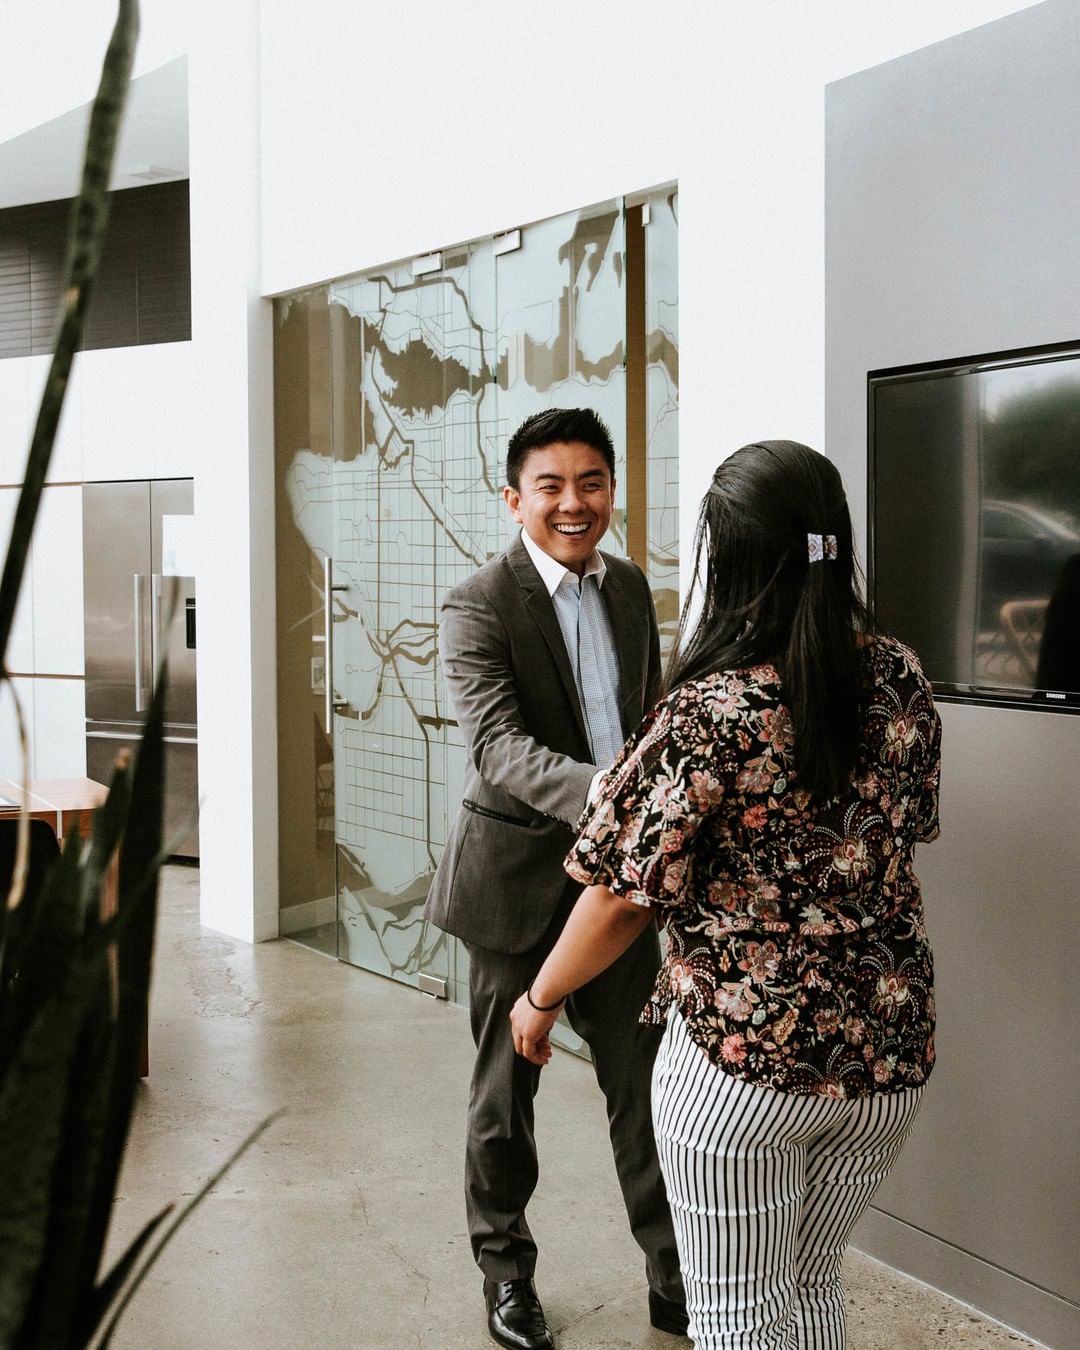 Woman shakes hands with real estate agent during client meeting. Photo by Instagram User @ruscarlosyvr